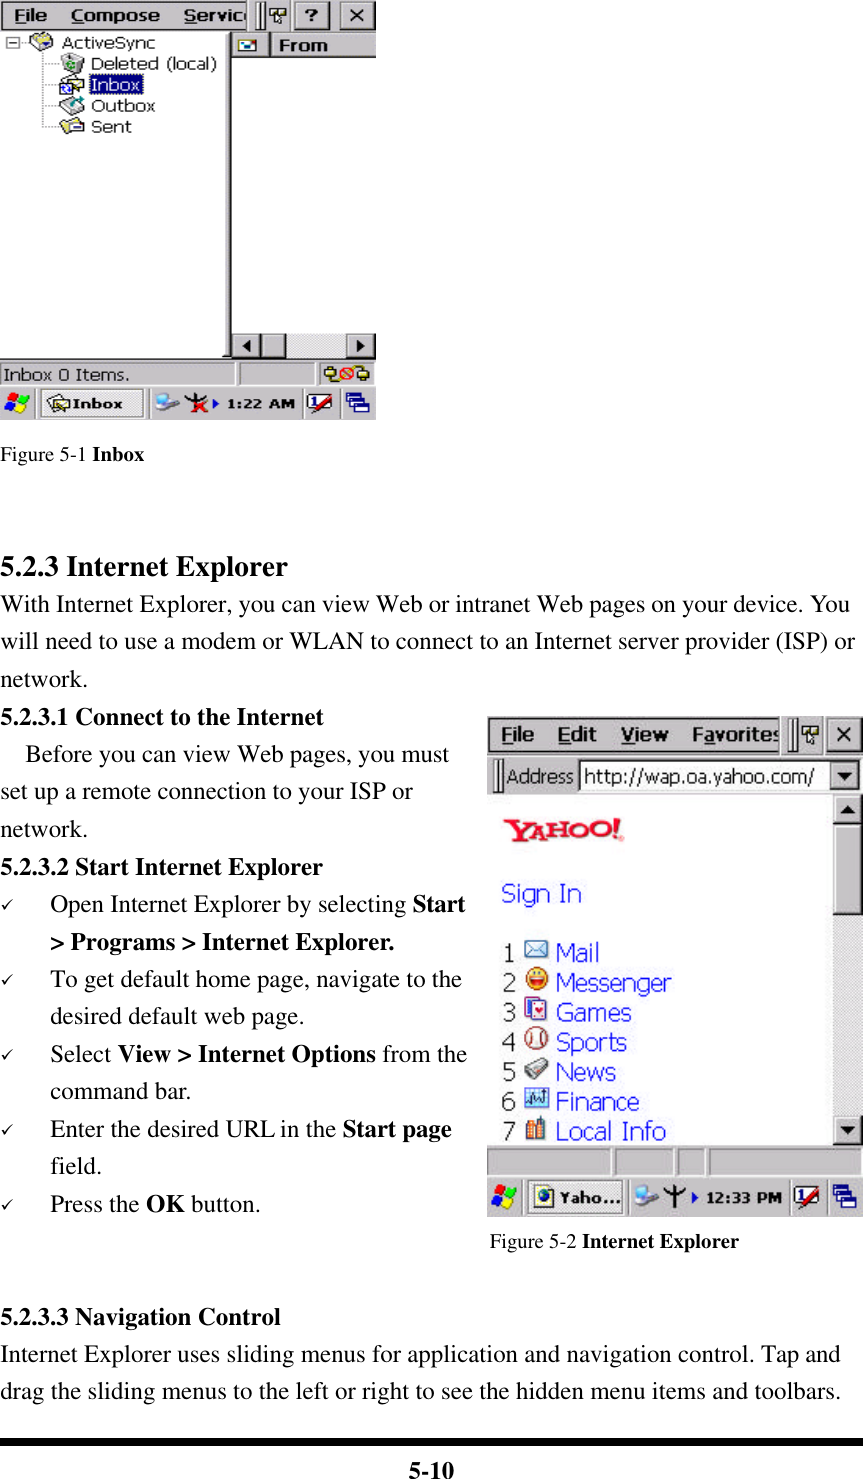  5-10  Figure 5-1 Inbox   5.2.3 Internet Explorer With Internet Explorer, you can view Web or intranet Web pages on your device. You will need to use a modem or WLAN to connect to an Internet server provider (ISP) or network. 5.2.3.1 Connect to the Internet   Before you can view Web pages, you must set up a remote connection to your ISP or network. 5.2.3.2 Start Internet Explorer ü Open Internet Explorer by selecting Start &gt; Programs &gt; Internet Explorer. ü To get default home page, navigate to the desired default web page. ü Select View &gt; Internet Options from the command bar. ü Enter the desired URL in the Start page field. ü Press the OK button. Figure 5-2 Internet Explorer  5.2.3.3 Navigation Control Internet Explorer uses sliding menus for application and navigation control. Tap and drag the sliding menus to the left or right to see the hidden menu items and toolbars. 